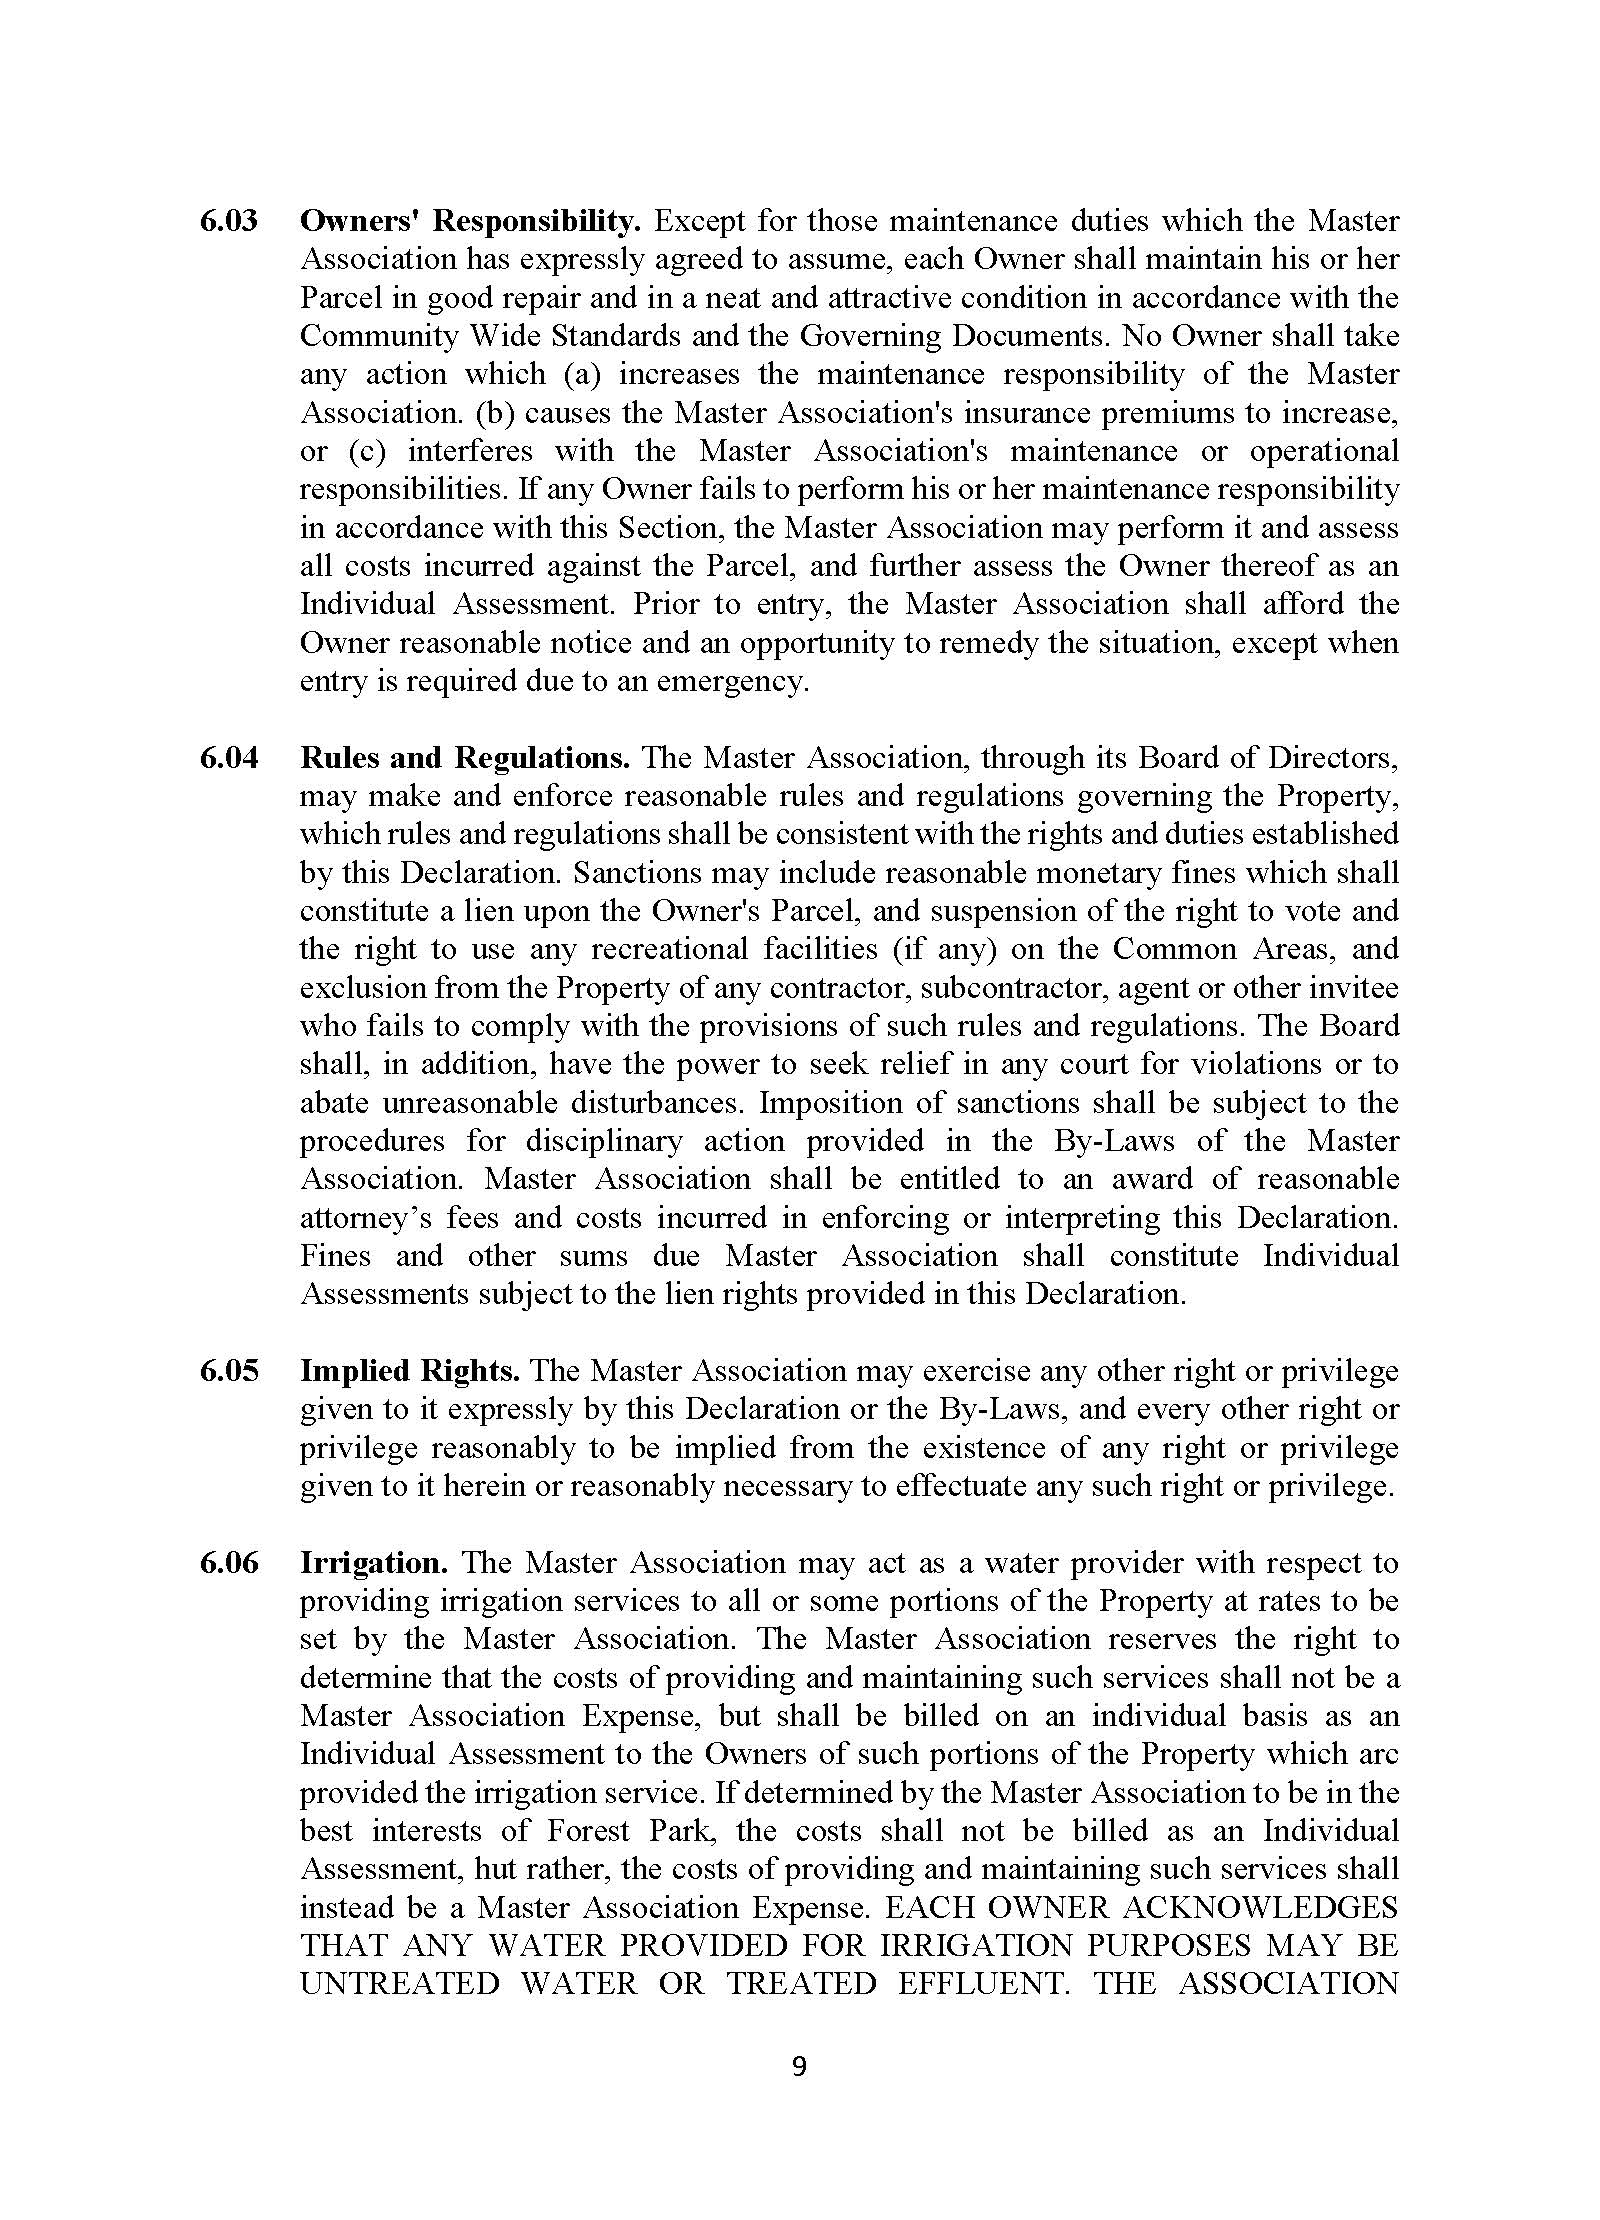 Article 6.X Page 9